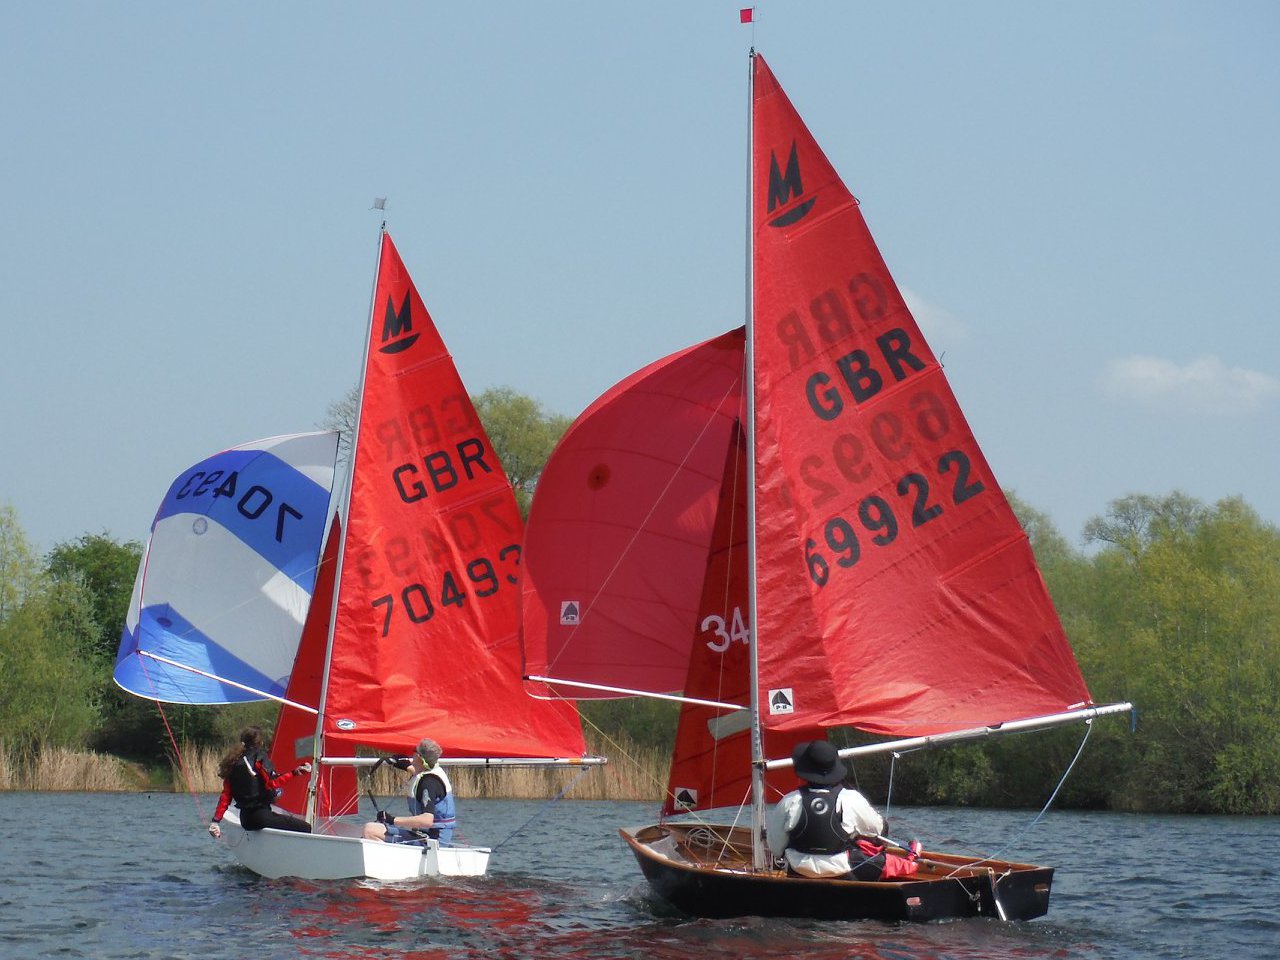 Two Mirror dinghies racing downwind on a lake with spinnakers set